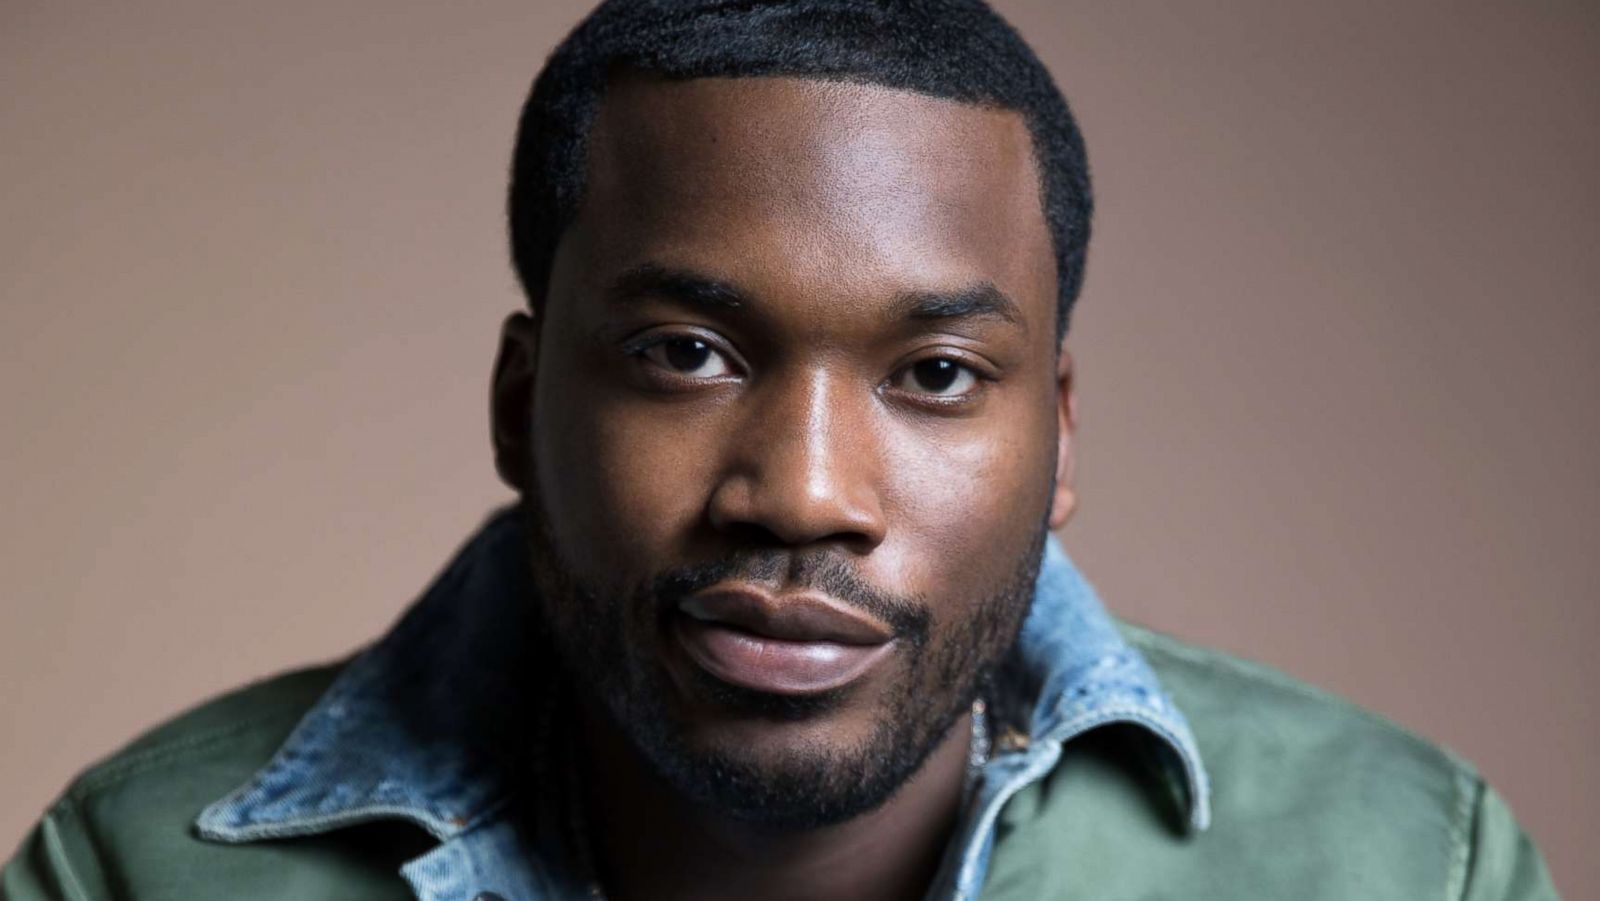 How Meek Mill went from jail to criminal justice reform hero